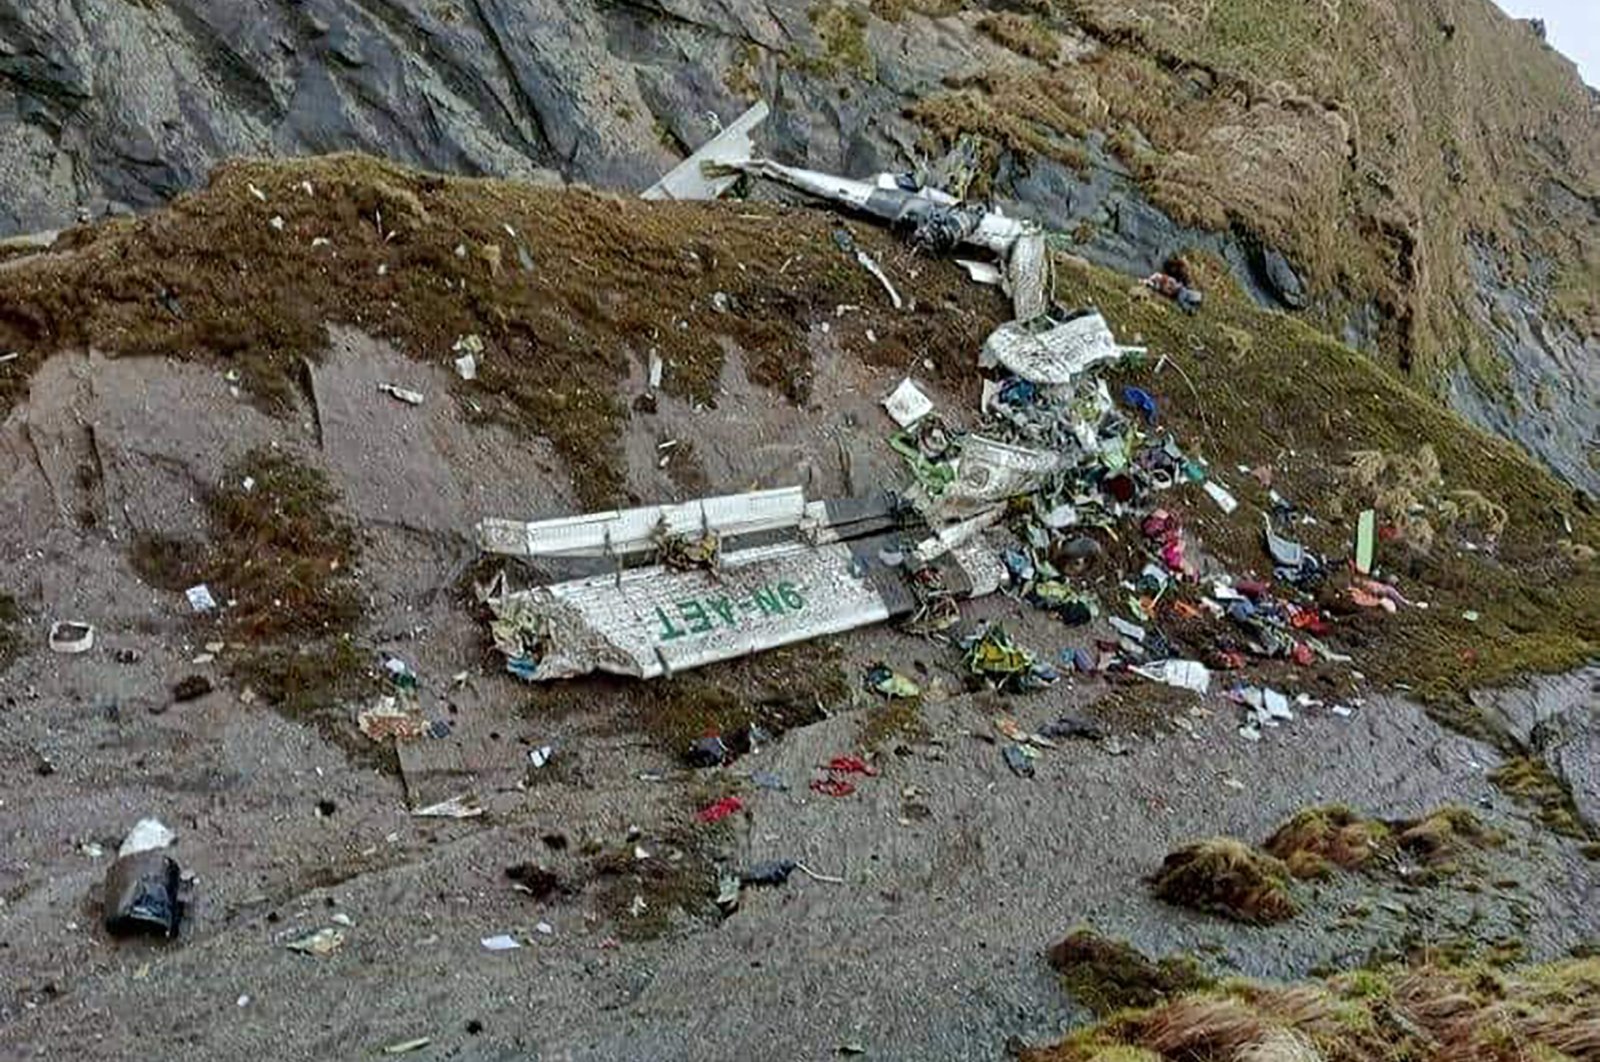 The wreckage of a plane in a gorge in Sanosware in Mustang district close to the mountain town of Jomsom, west of Kathmandu, Nepal, May 30, 2022. (Fishtail Air via AP)